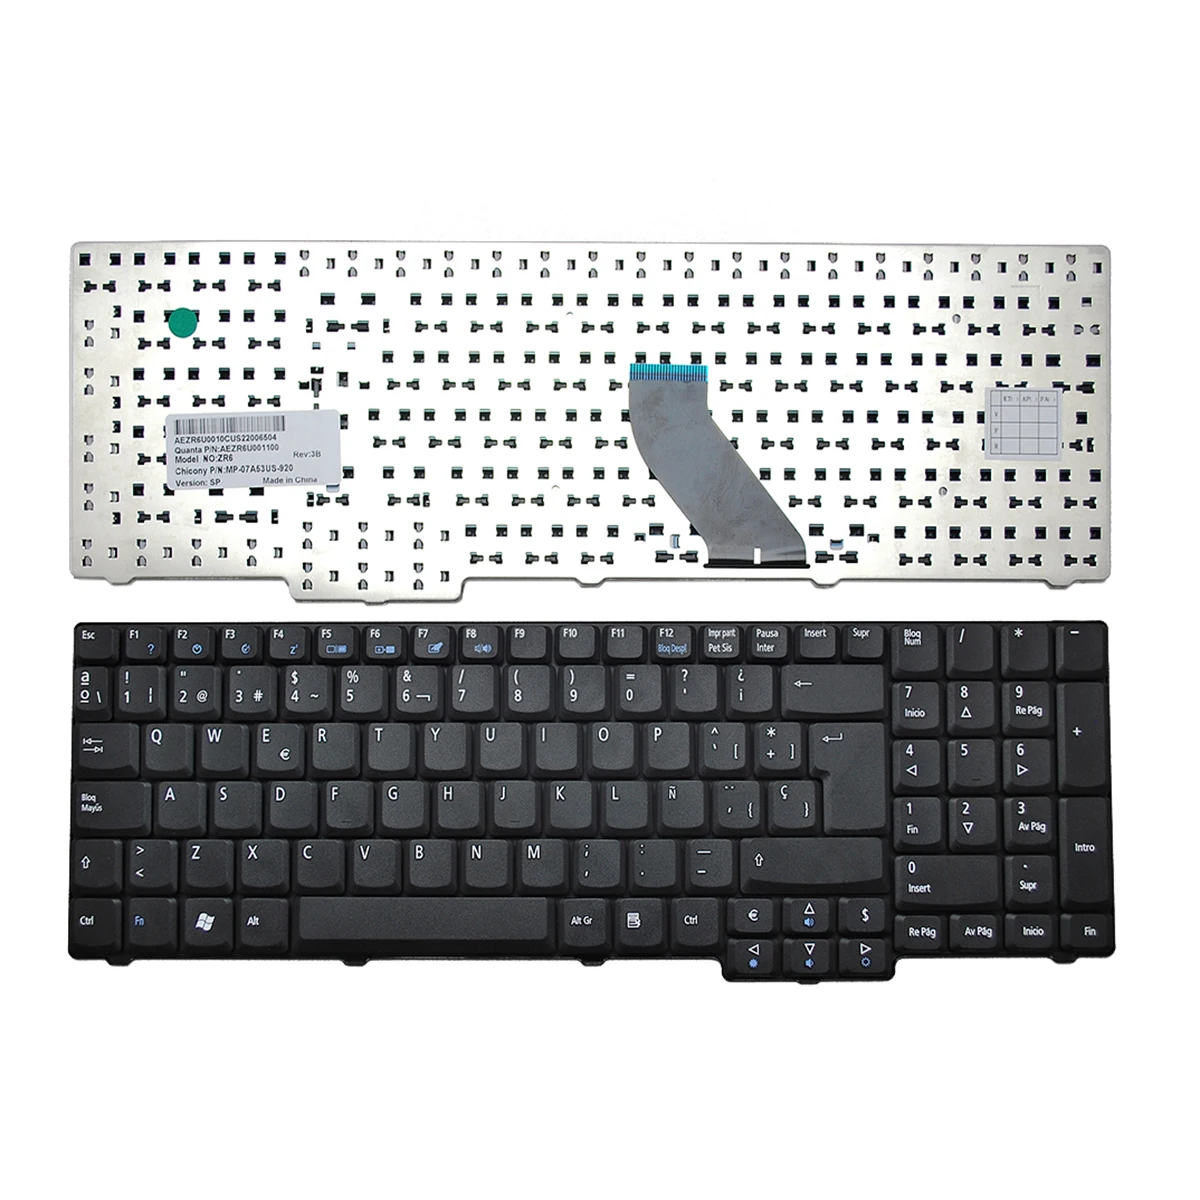 

SP Spanish Laptop Replacement Keyboard for Acer Aspire 5535 5735 8930G 7000 7110 9300 9400 Black No Backlit Without Foil